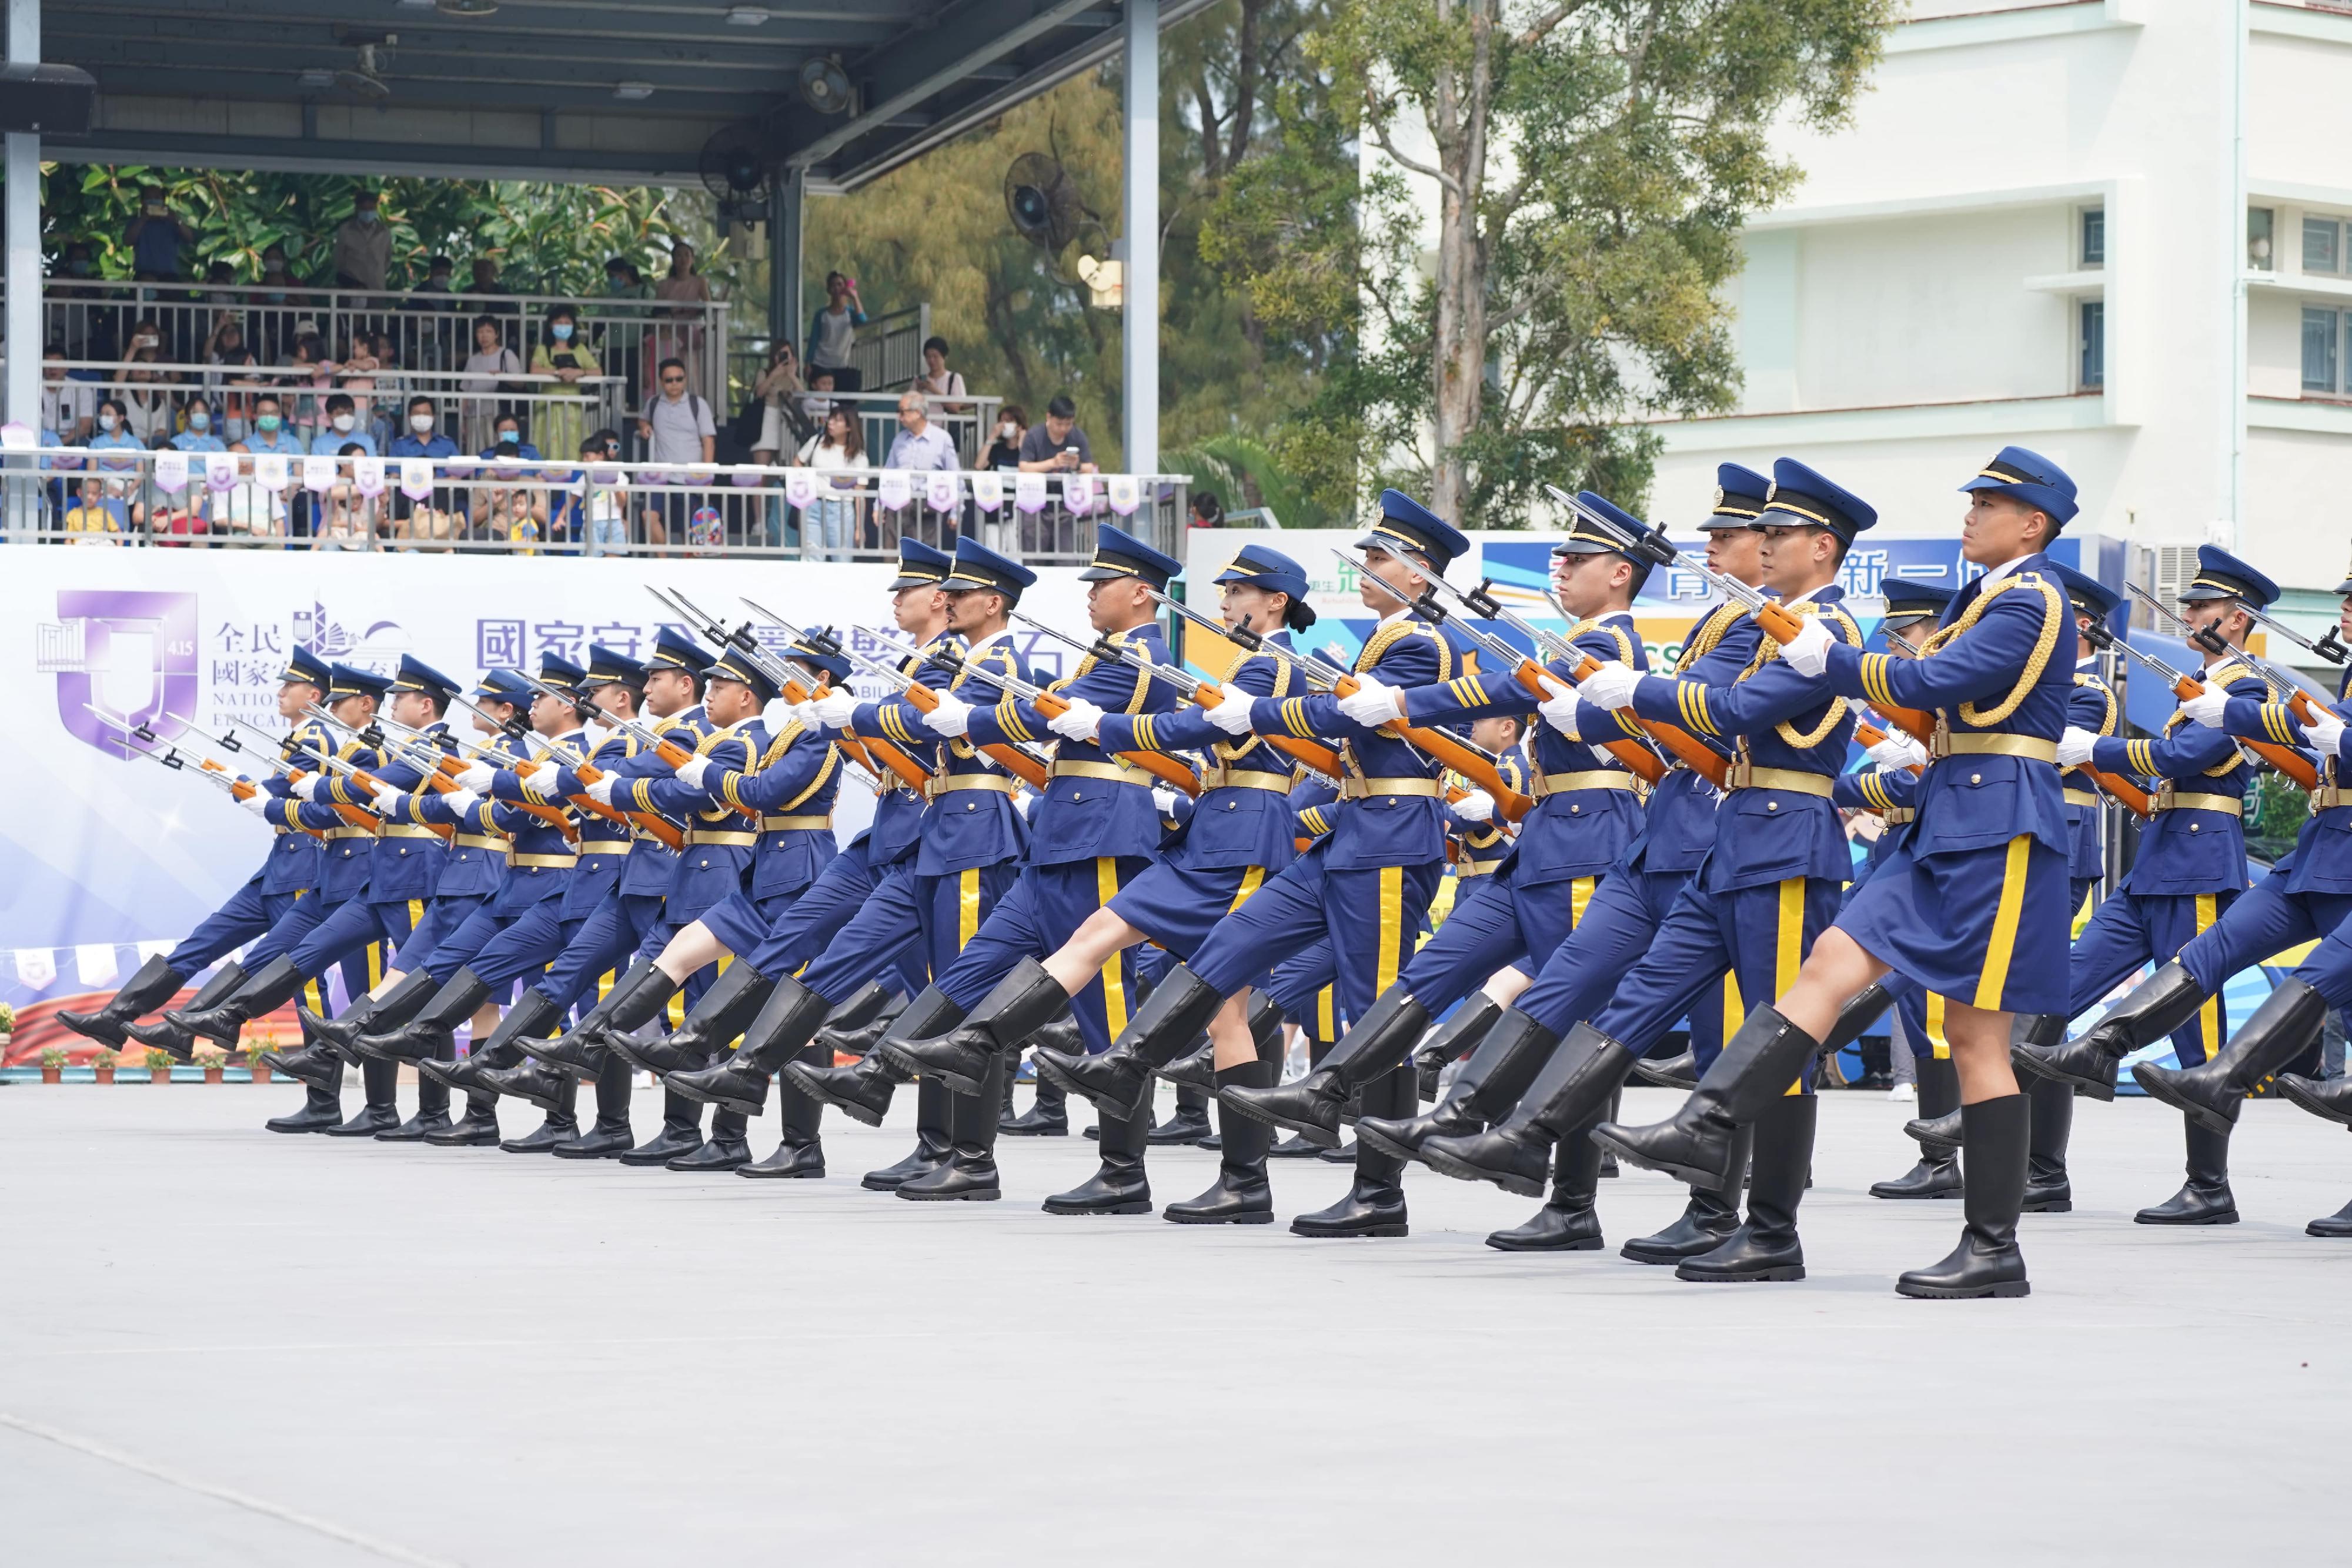 The Correctional Services Department held an open day at the Hong Kong Correctional Services Academy today (April 15), the National Security Education Day, to deepen the public's understanding of national security and the work of the department, including its work and effectiveness in safeguarding national security. Photo shows a Chinese-style foot drill demonstration by the Guard of Honour.